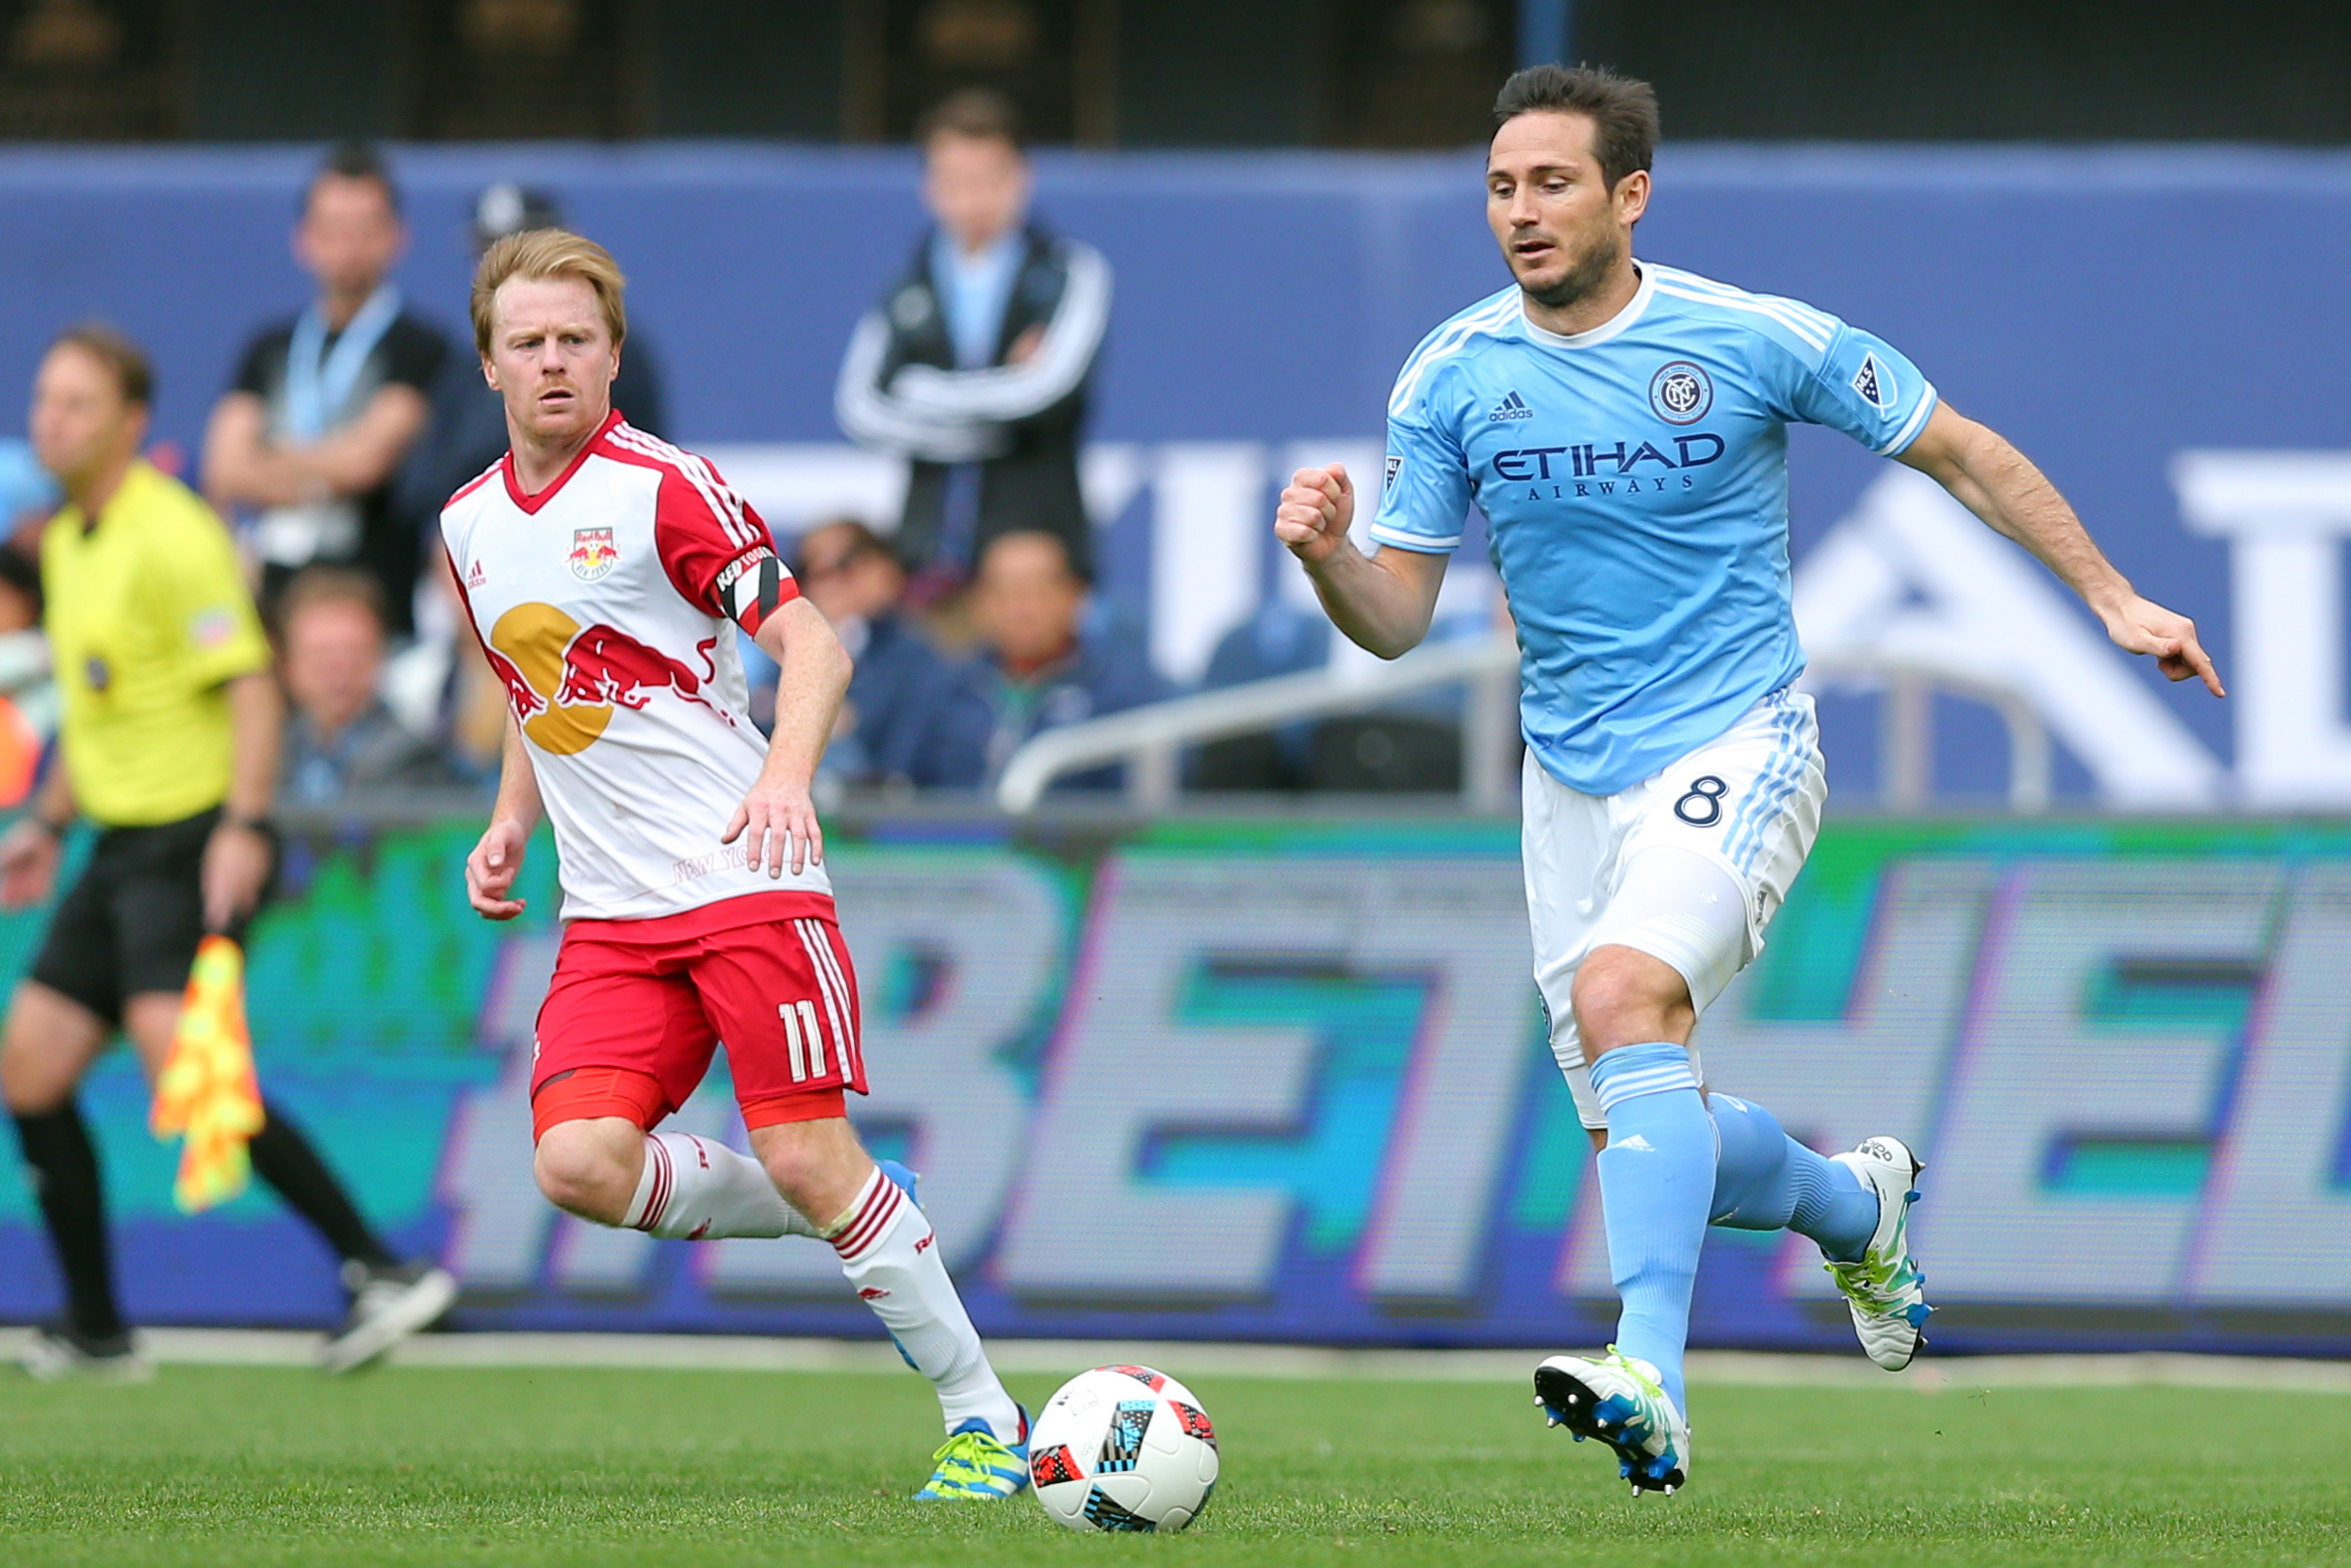 May 21, 2016; New York, NY, USA; New York City FC midfielder Frank Lampard (8) controls the ball against New York Red Bulls midfielder Dax McCarty (11) during the second half at Yankee Stadium. The Red Bulls defeated New York City 7-0. Mandatory Credit: Brad Penner-USA TODAY Sports